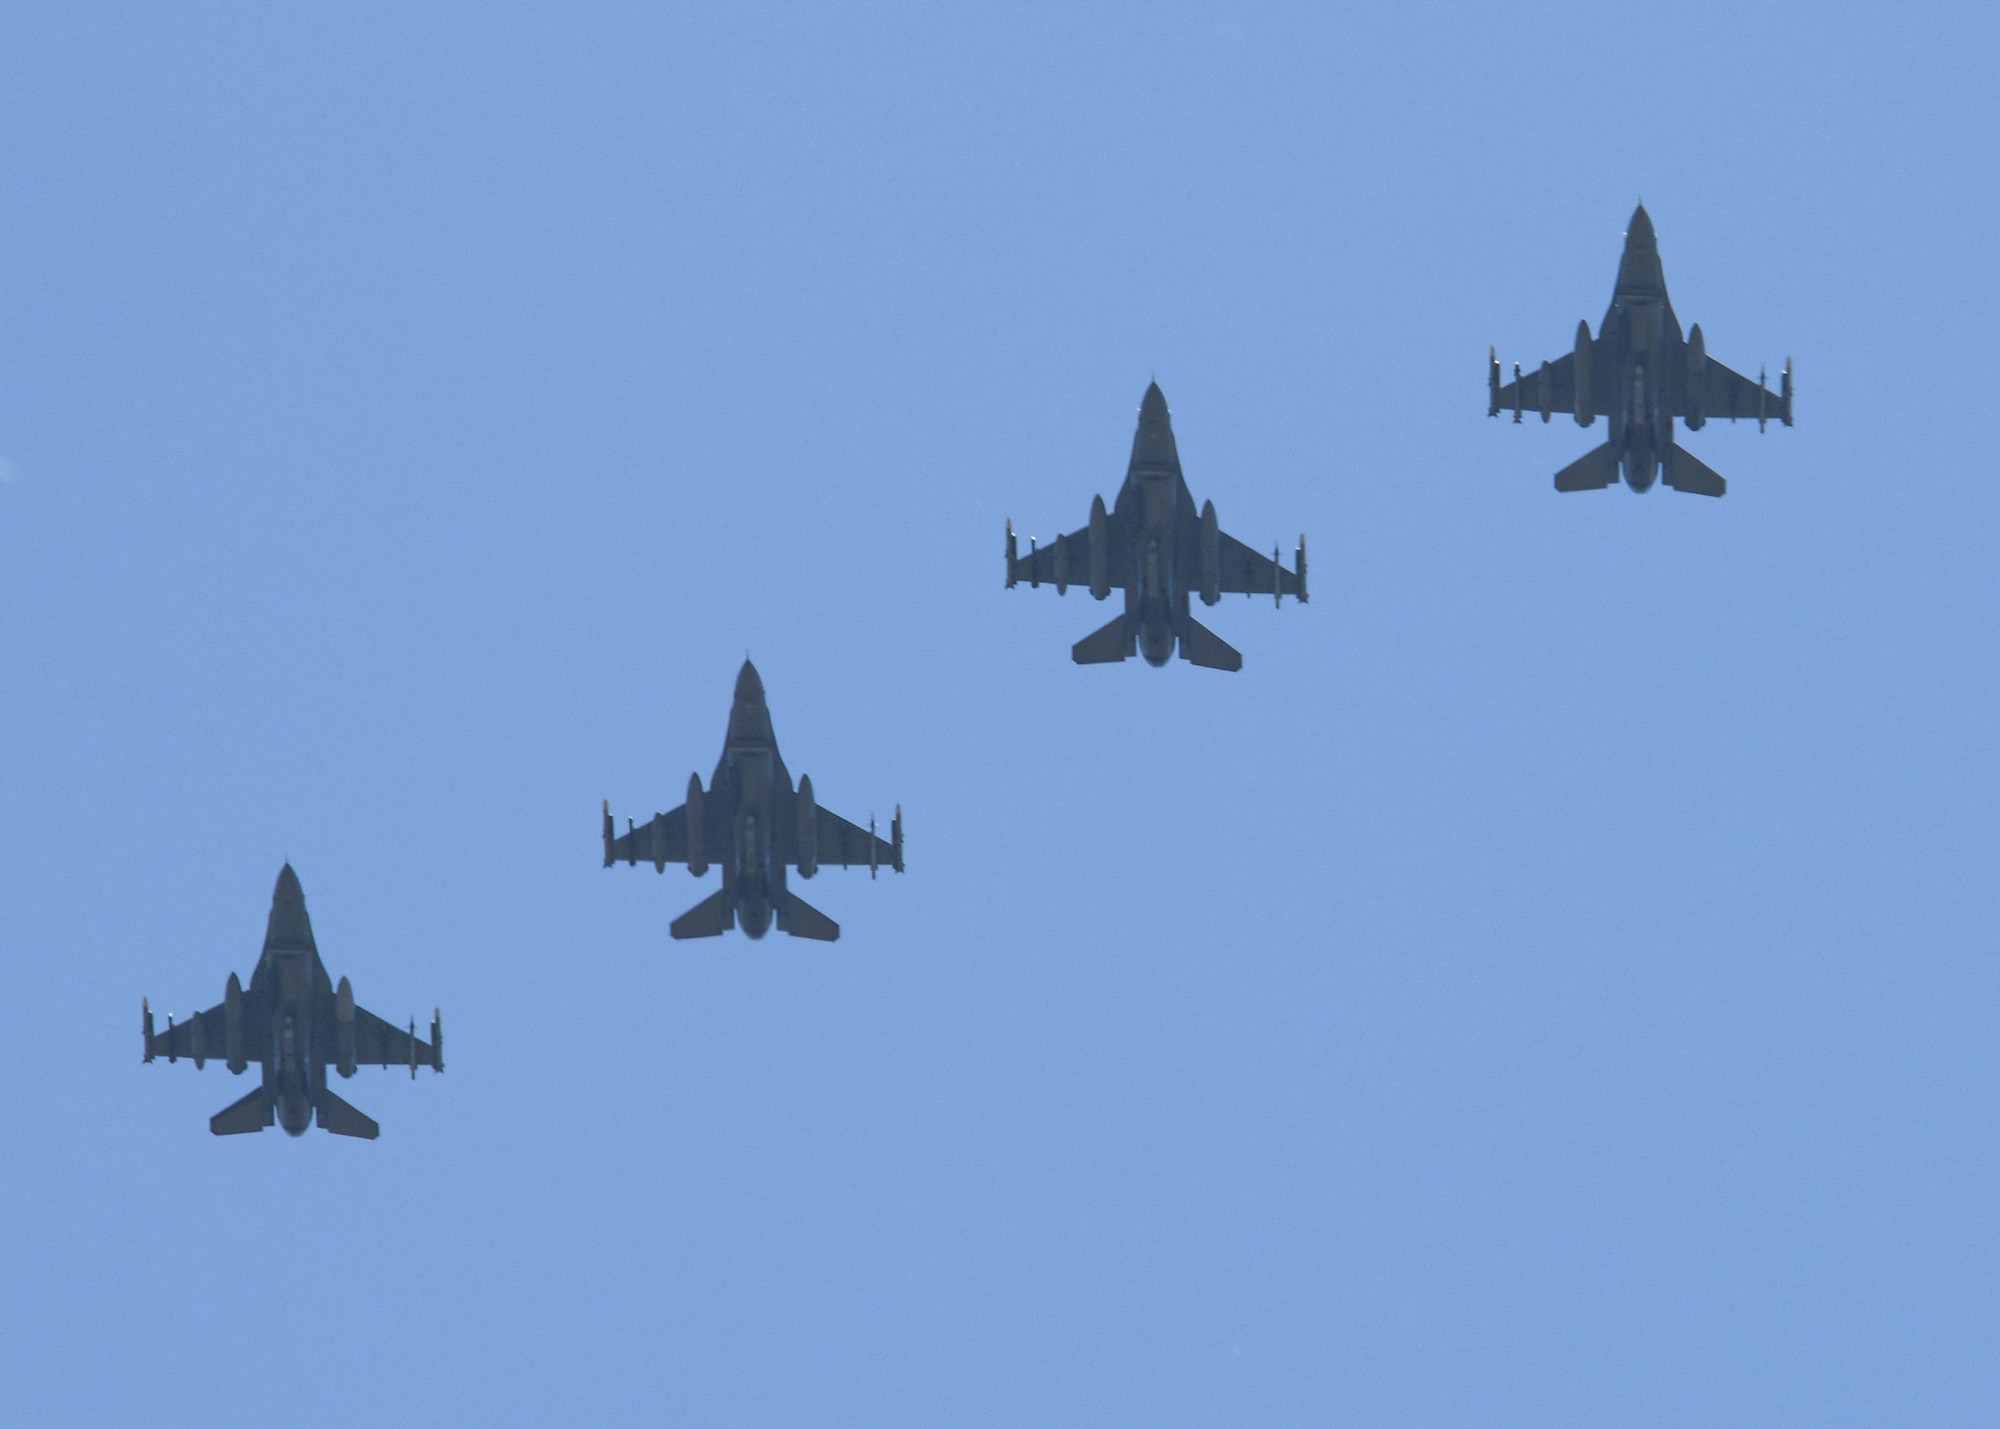 Four U.S. Air Force F-16 Fighting Falcons assigned to the 555th Fighter Squadron participating in Falcon Strike 21 (FS21) fly in formation over Amendola Air Base, Italy, June 4, 2021. Six U.S. Air Force F-16C aircraft are participating in Falcon Strike 21 (FS21), an exercise involving service members from the U.S., Israel, Italy and the United Kingdom to integrate fourth and fifth generation fighter capabilities in a large force employment event. Exercises like FS21 provide a venue to train with other nations, build readiness, practice interoperability, and enhance enduring relationships. (U.S. Air Force photo by Airman 1st Class Brooke Moeder)